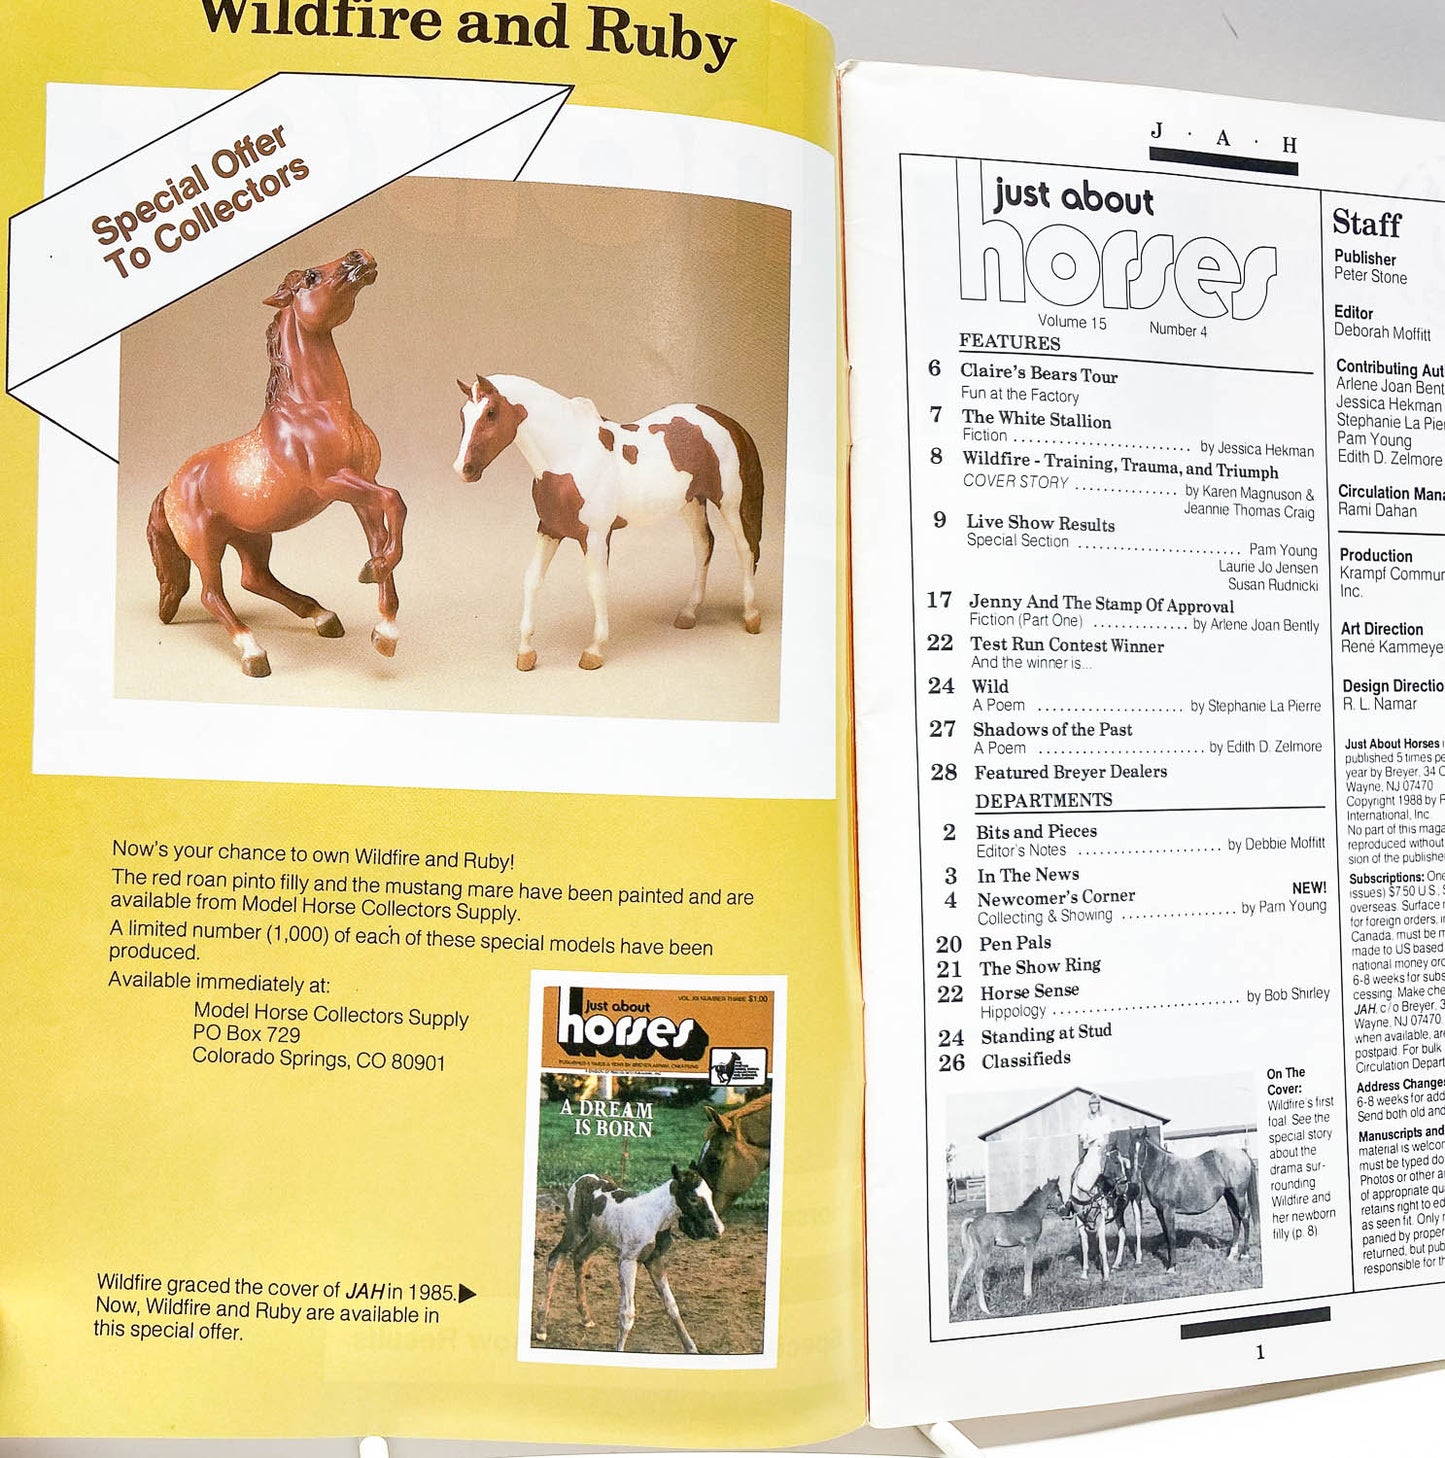 Just About Horses Magazine Vol. 15 No. 4, 1988, Sept/Oct